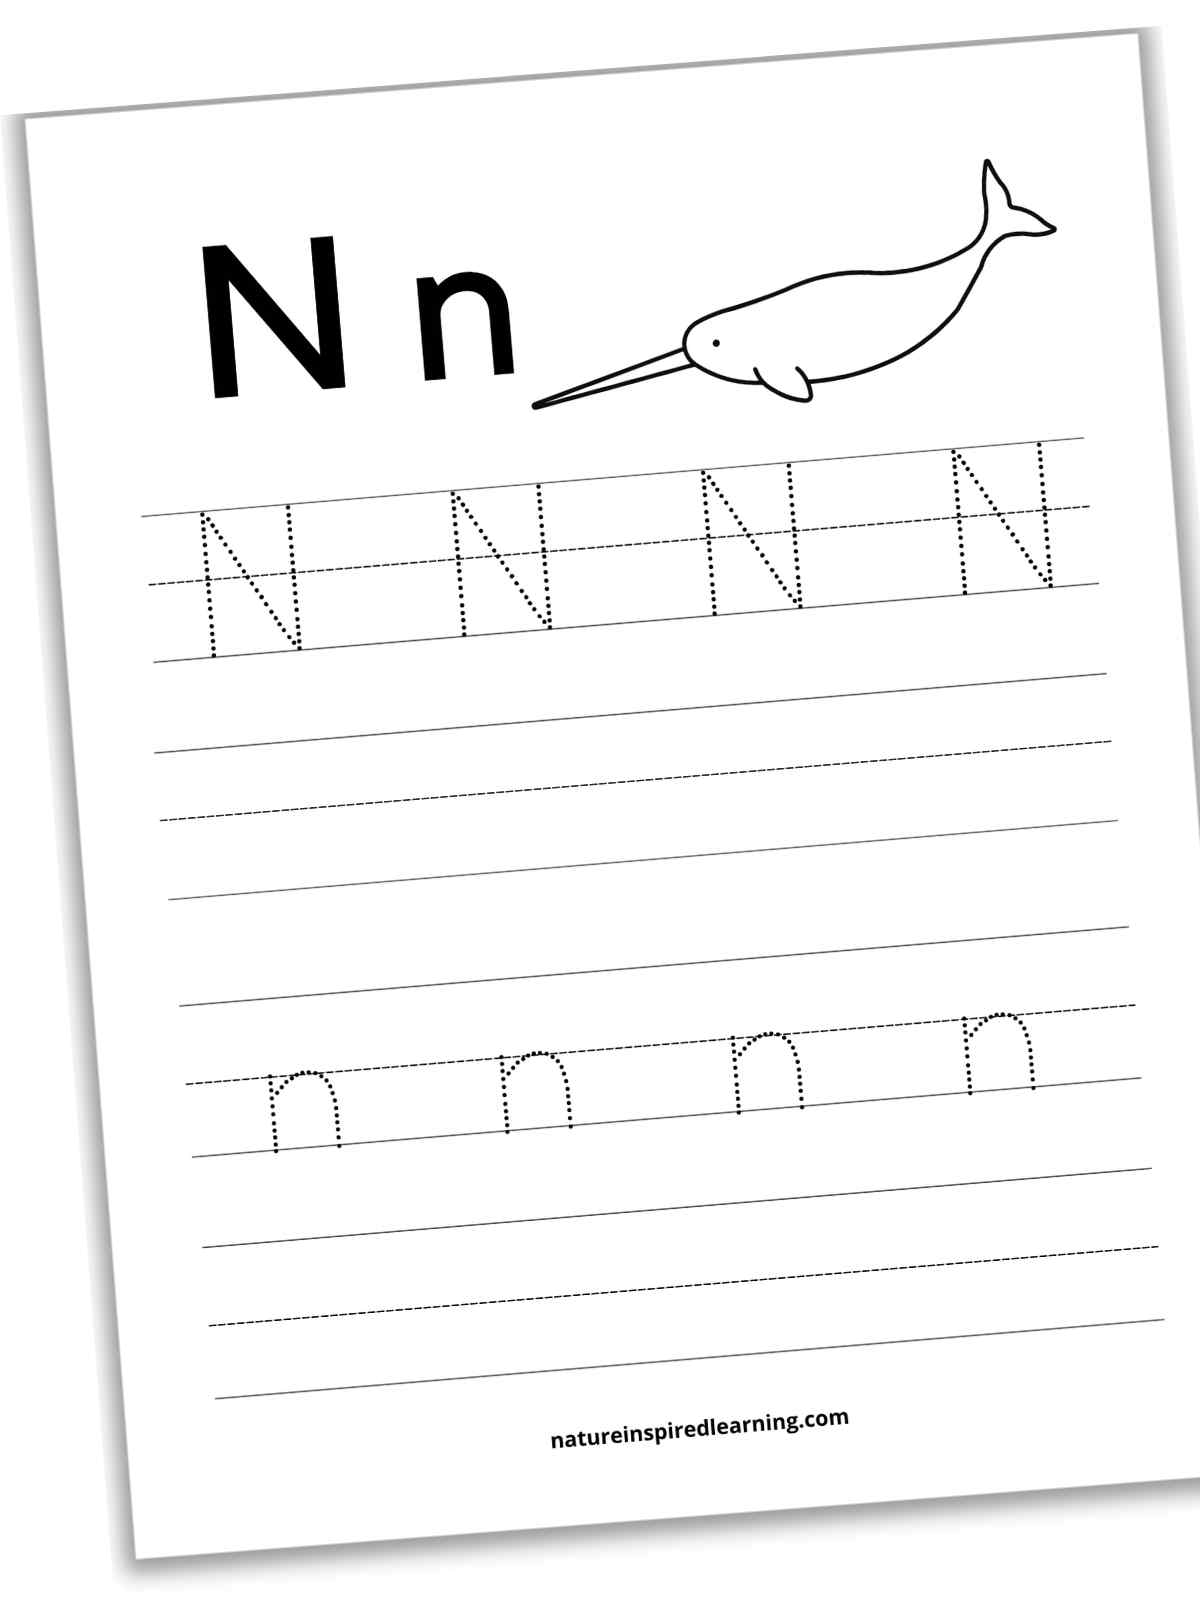 N n in bold next to a narwhal with four sets of lines below. Four dotted N's on the first set then a blank set, four n's on the next set then a blank set of lines.